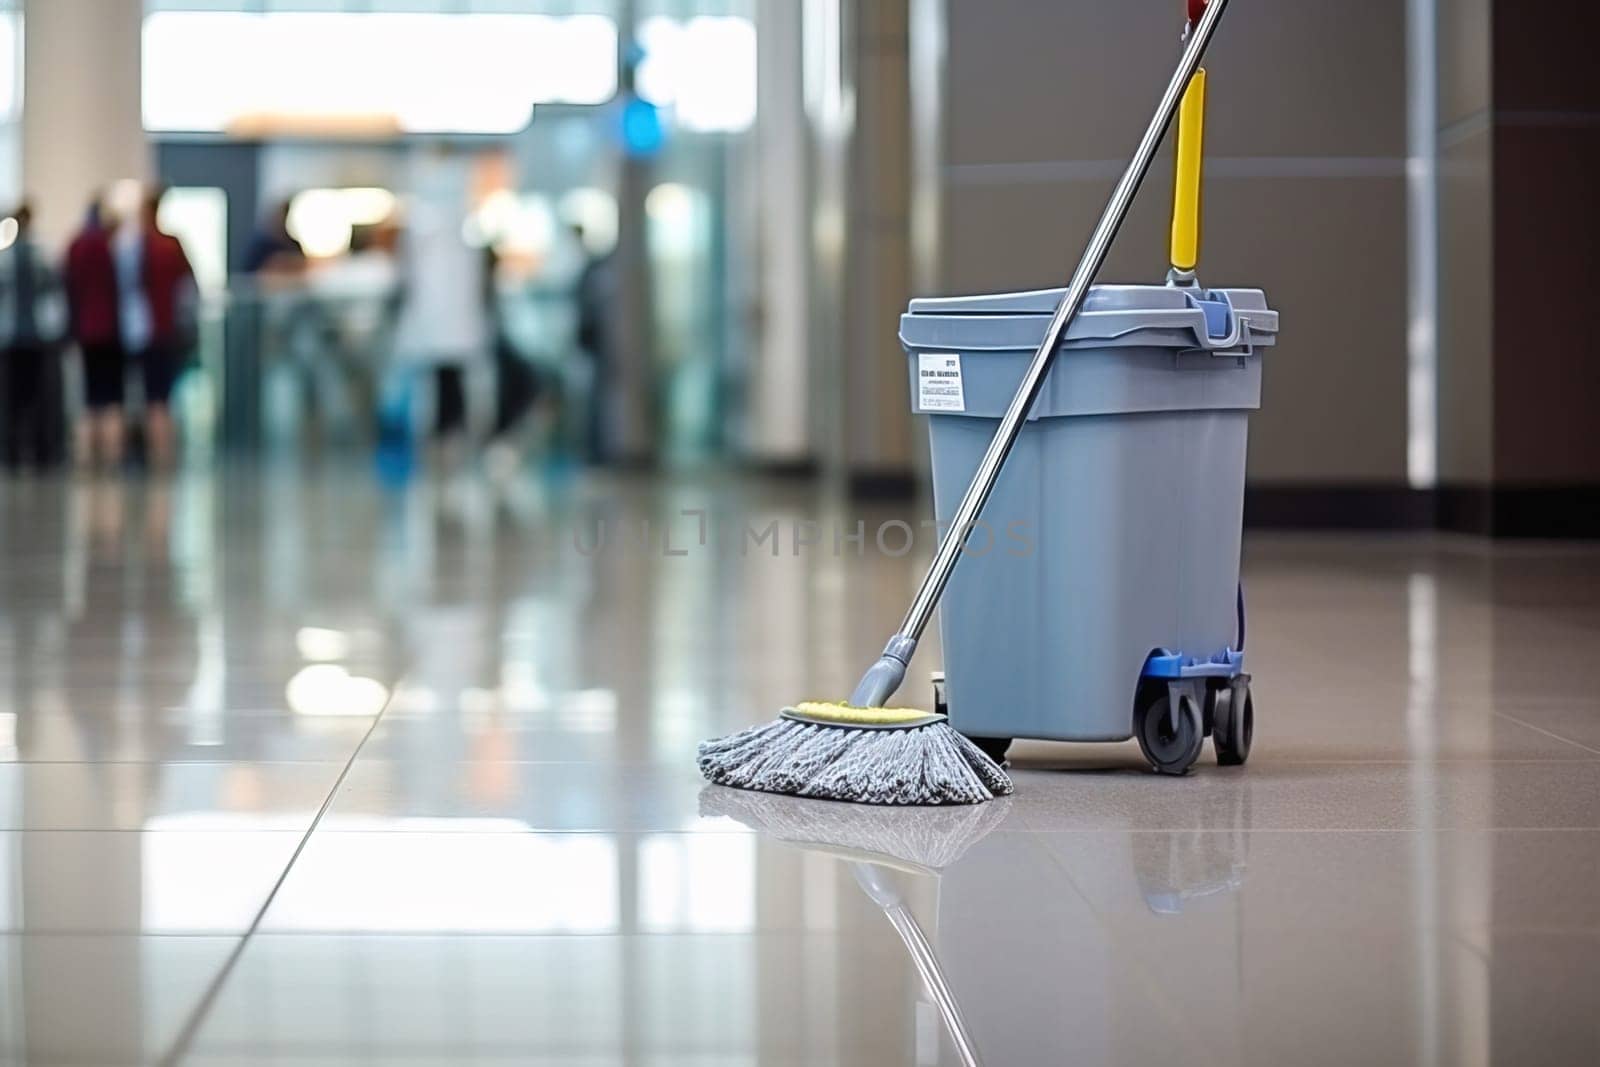 Tools for cleaning the room, a bucket with a mop. High quality photo